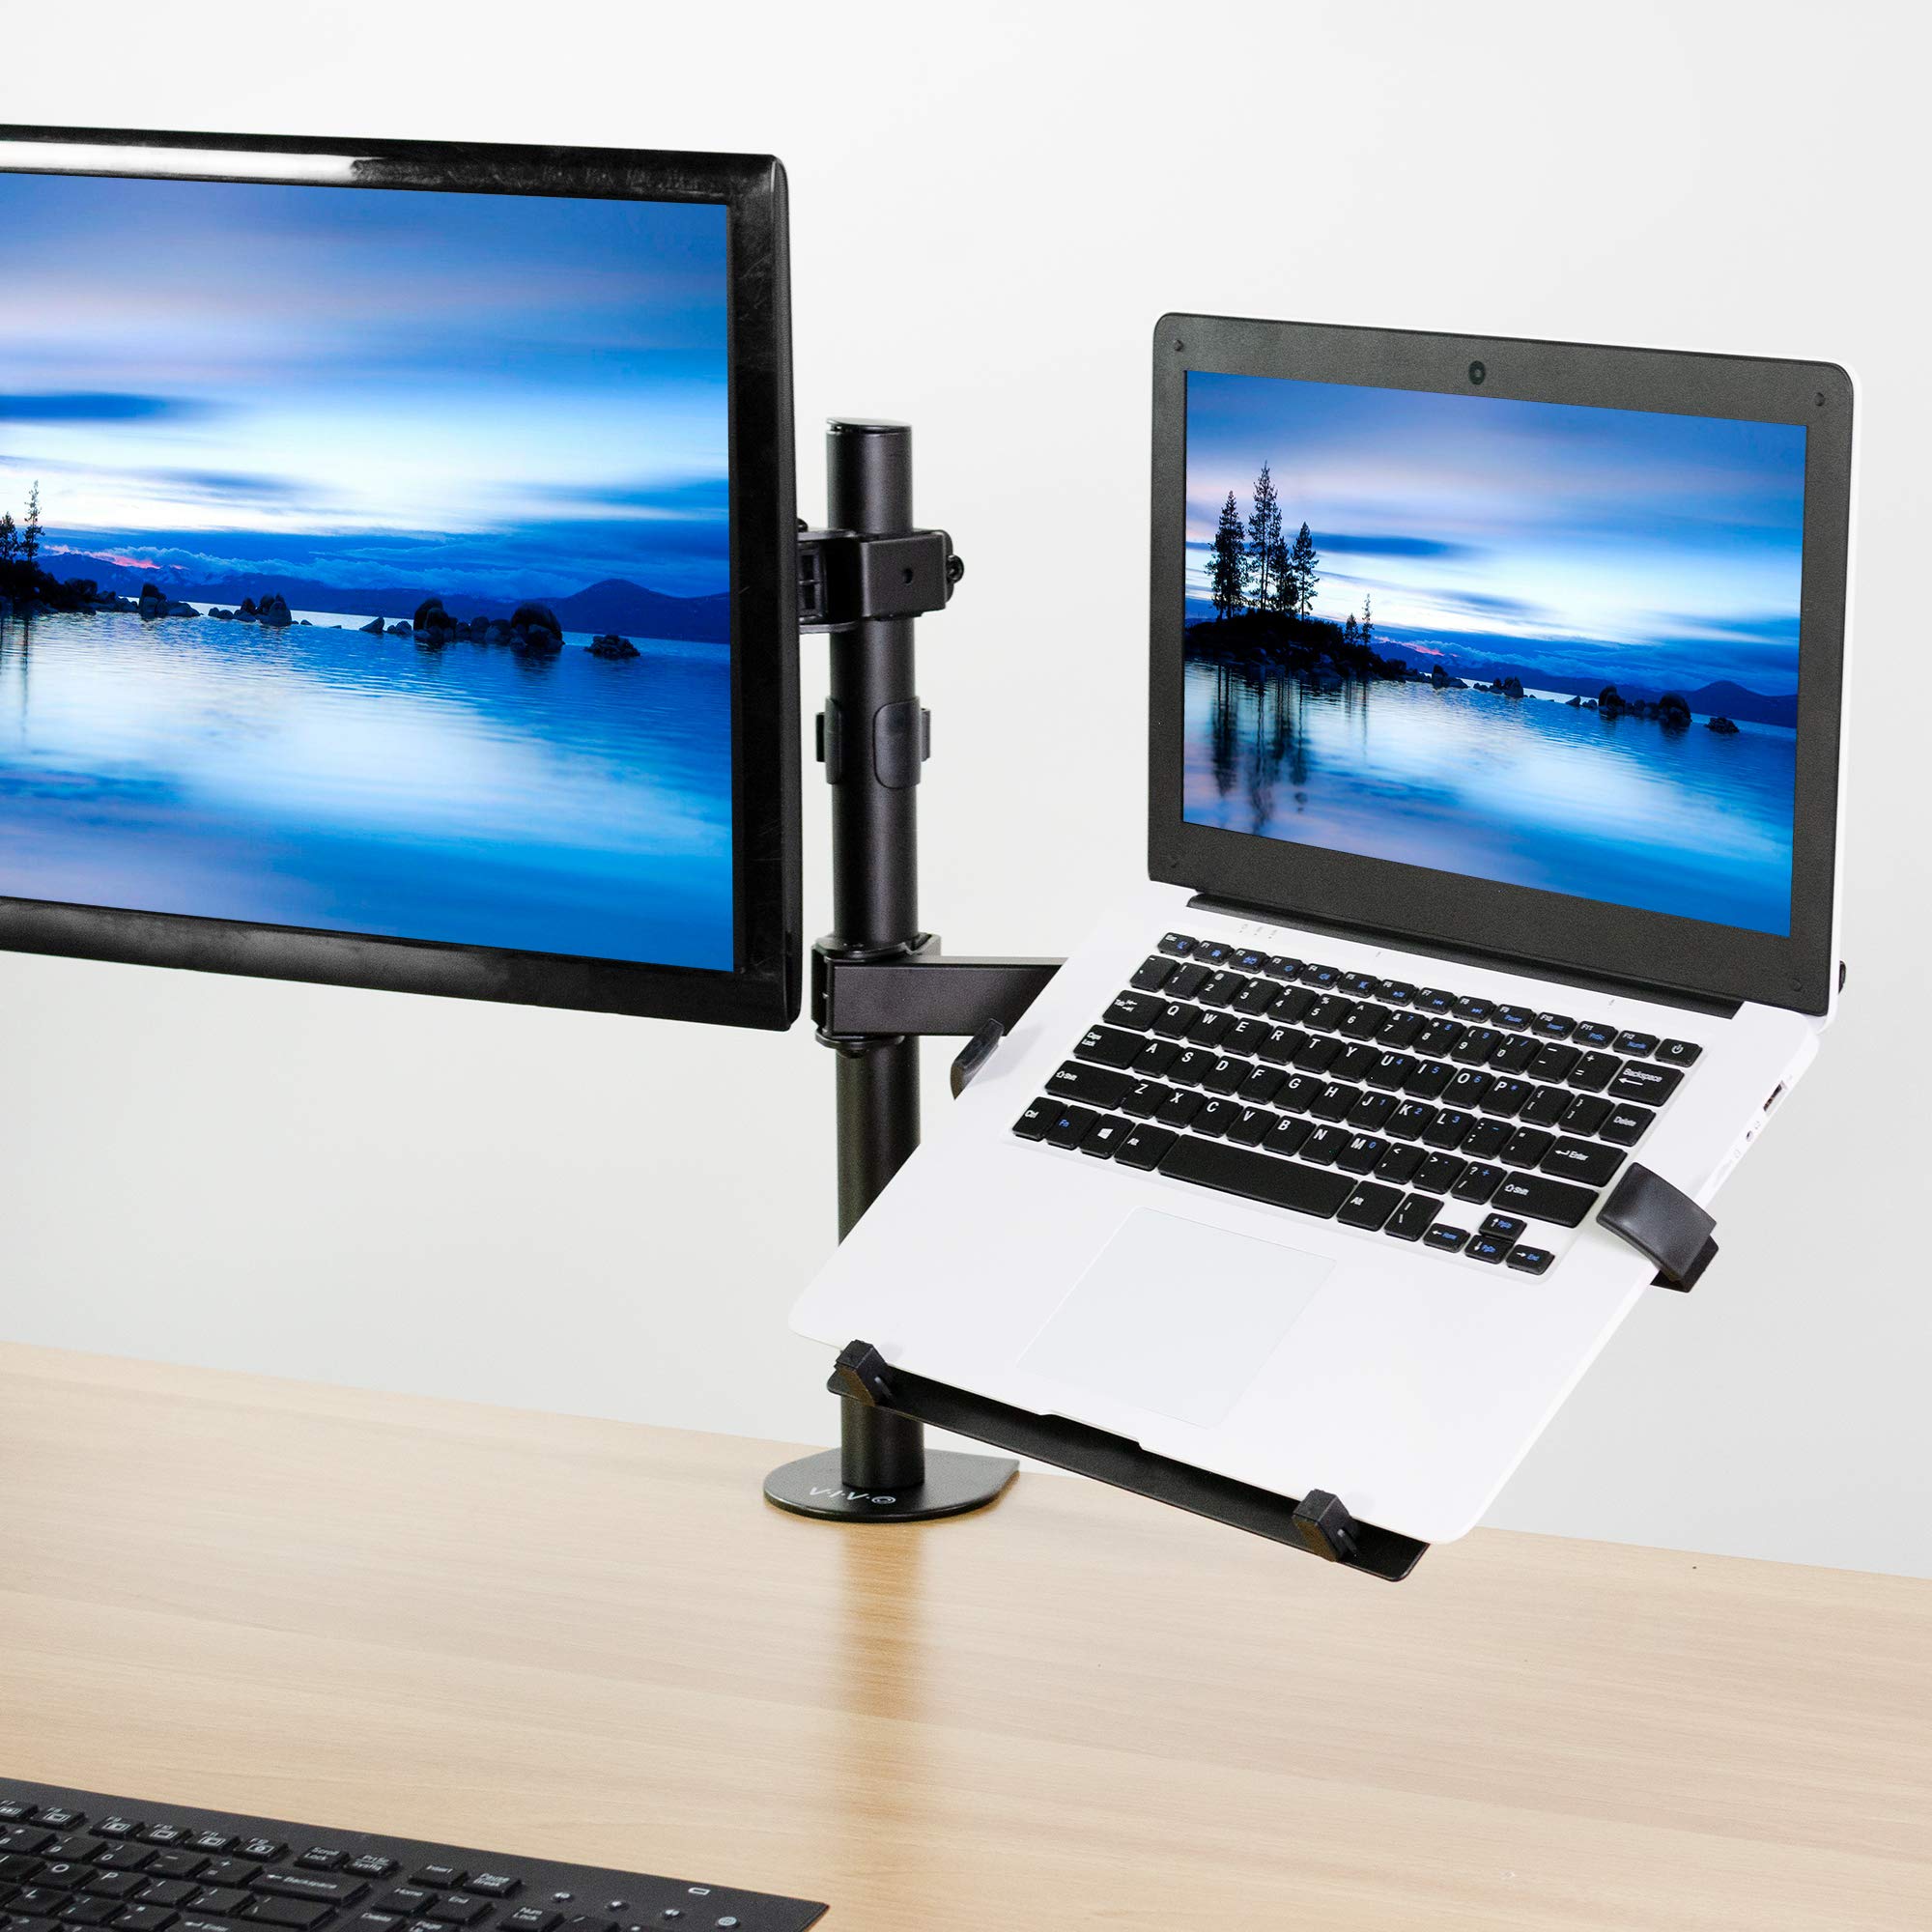 VIVO Universal Adjustable 10 to 15.6 inch Laptop Mount Holder for VESA Compatible Monitor Arms, Notebook Tray Stand-LAP3